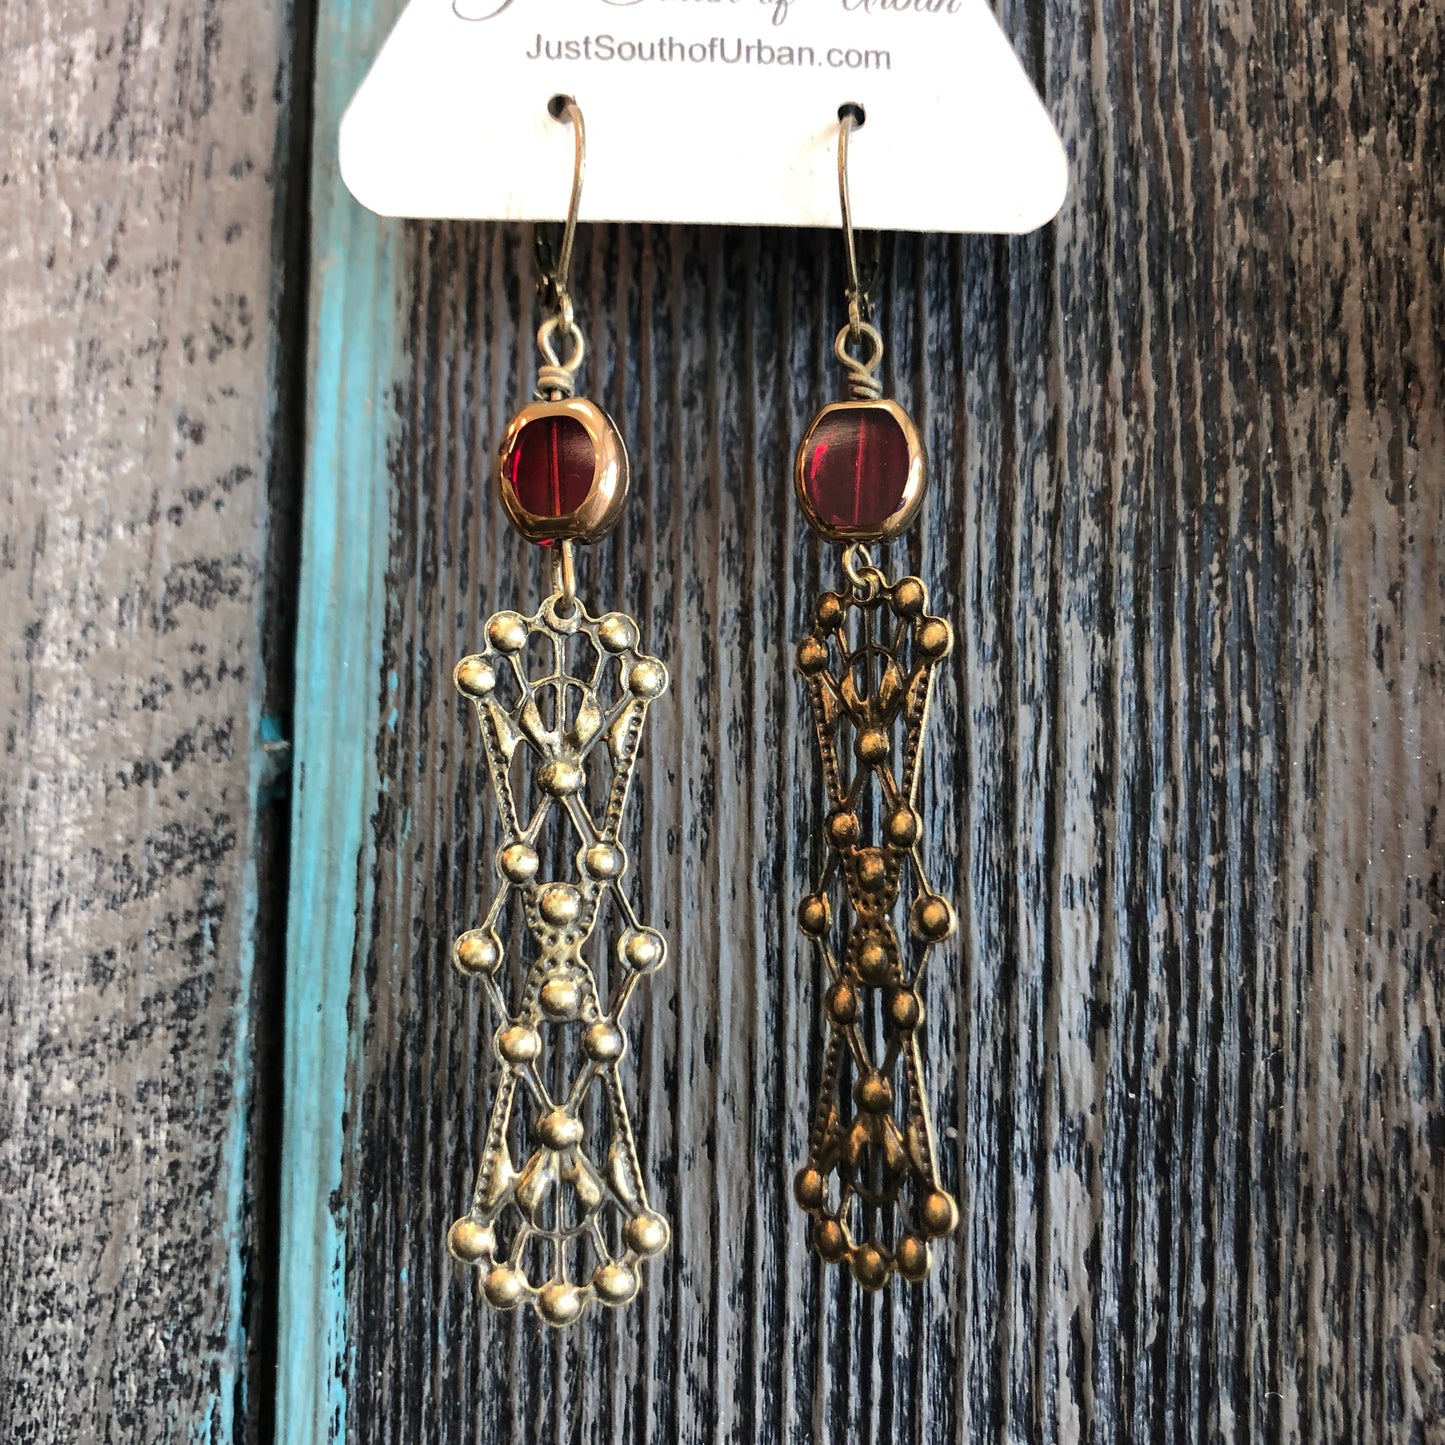 Vintage Filigree Dangle Earrings with RED Glass Bead